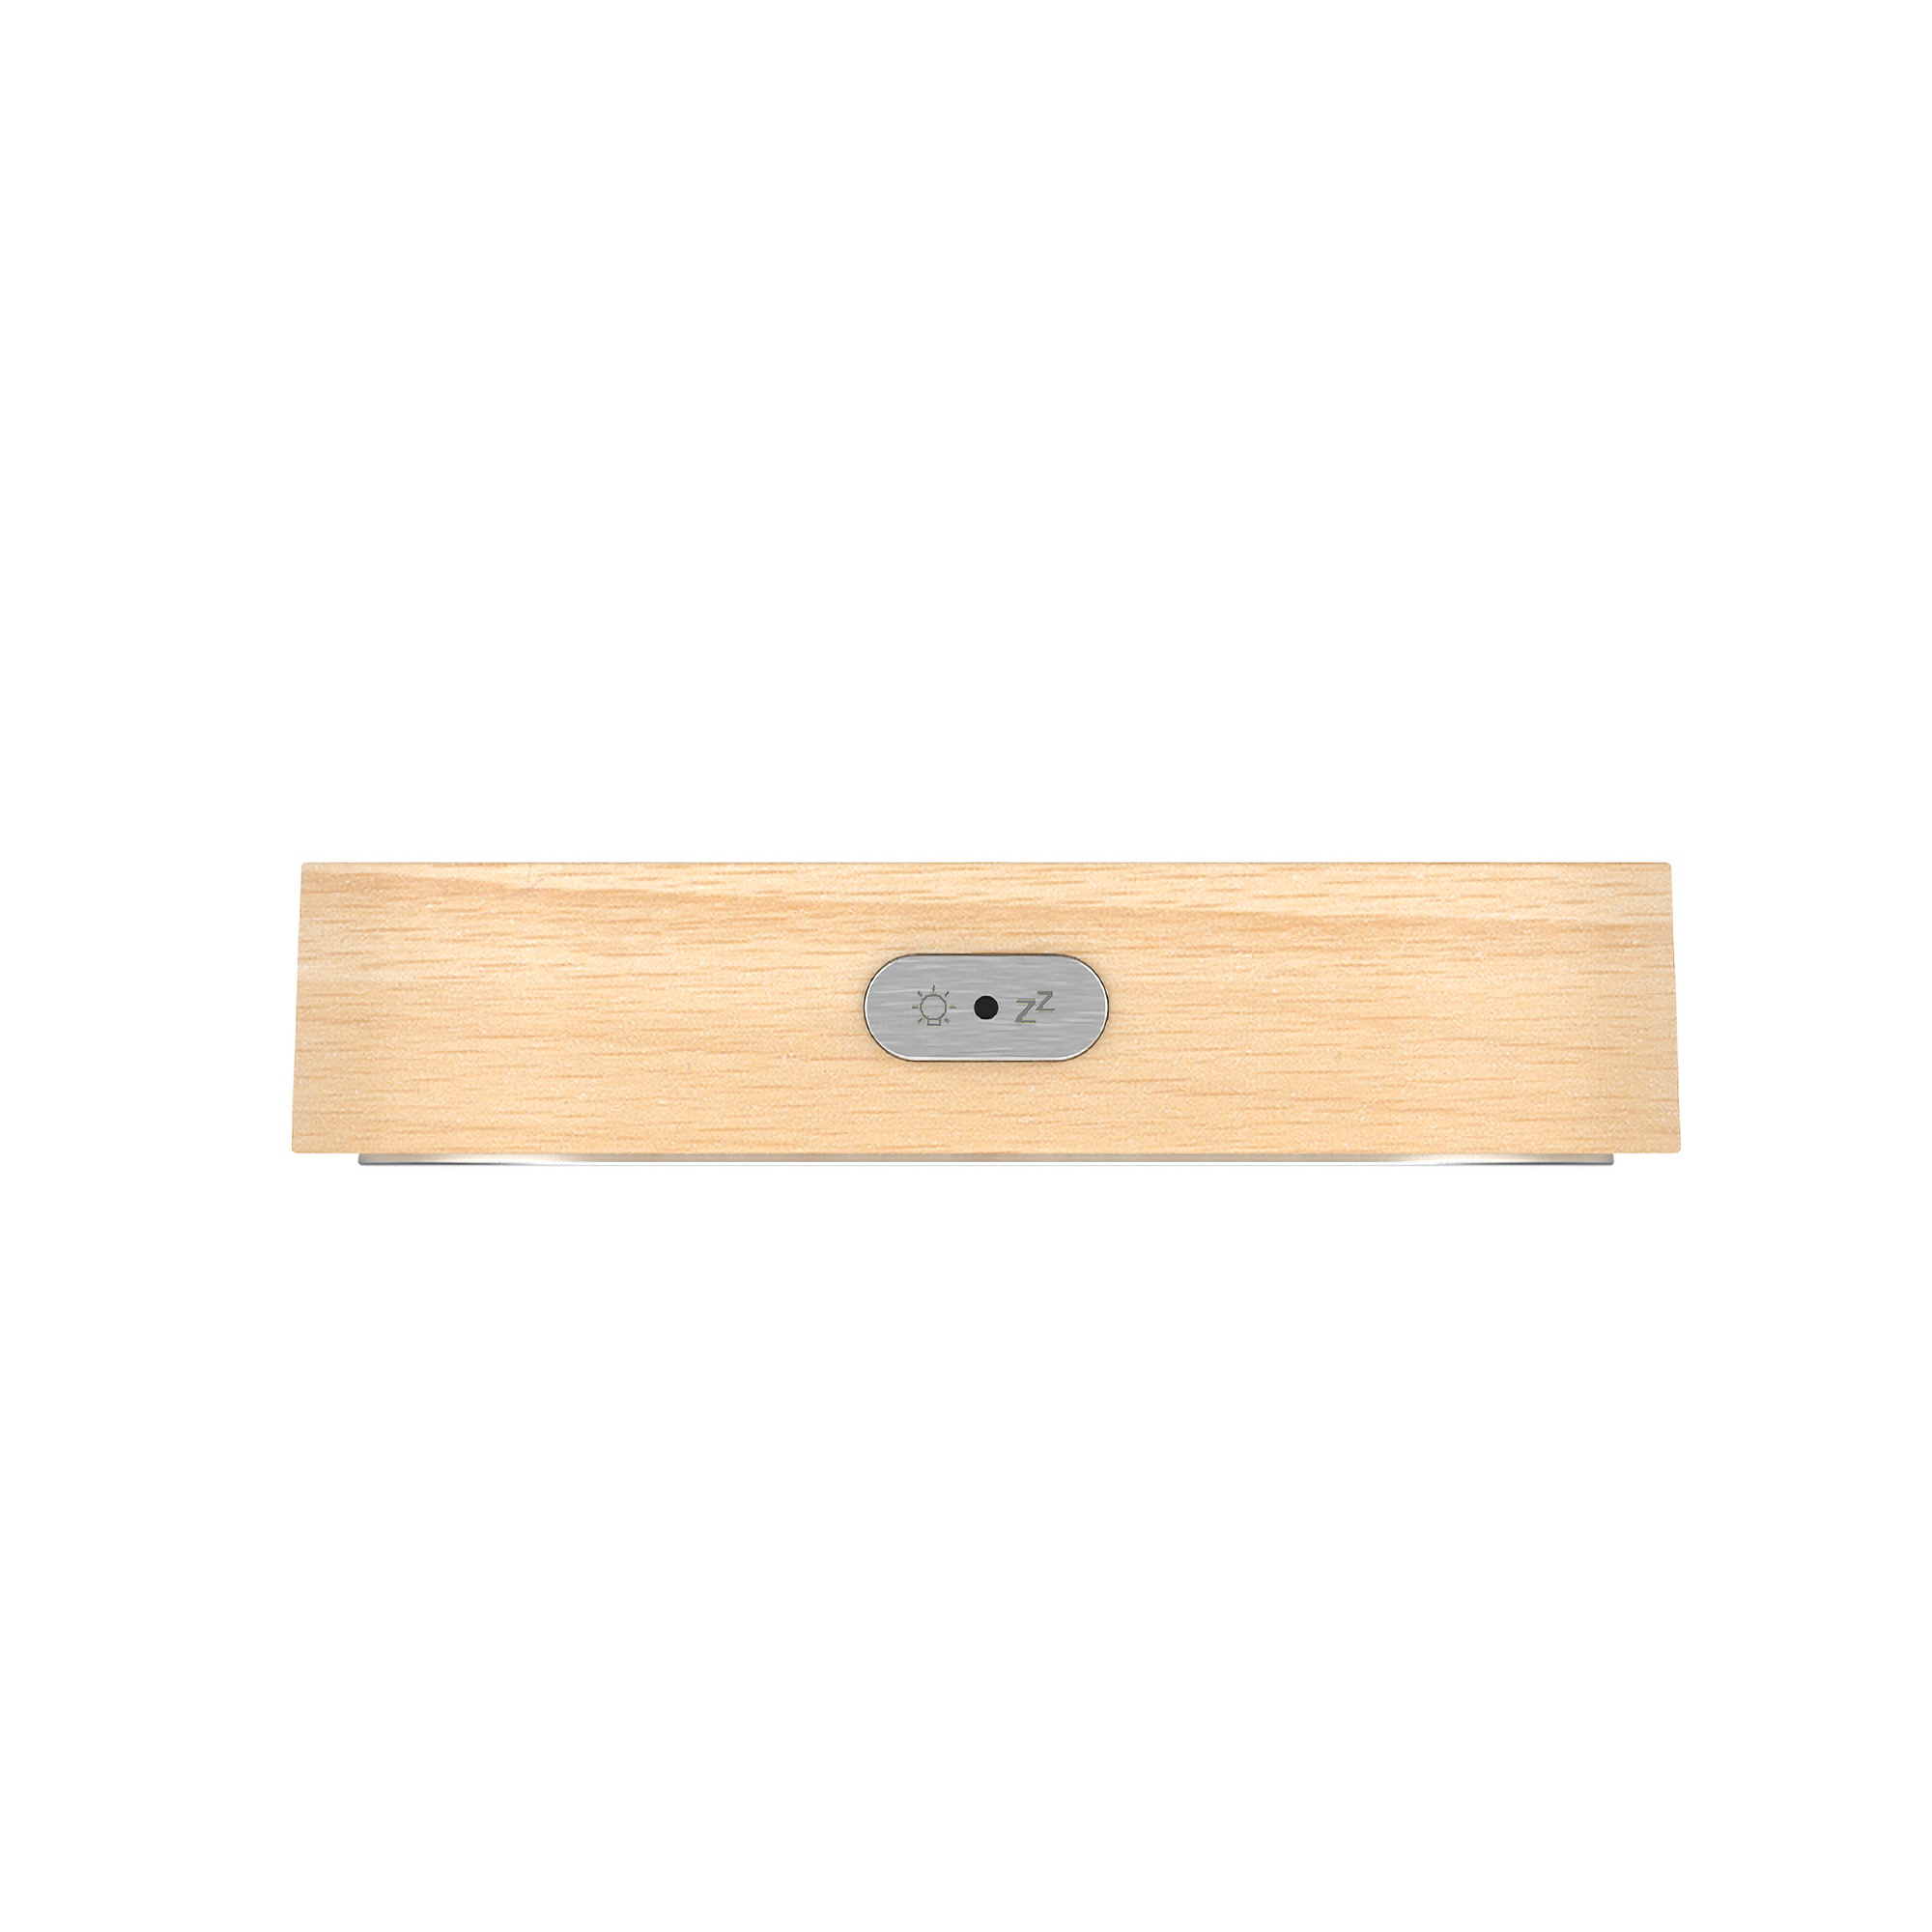 AAA-Batterie HOLZ Wecker DTWX7 LED - und ATTALOS USB-